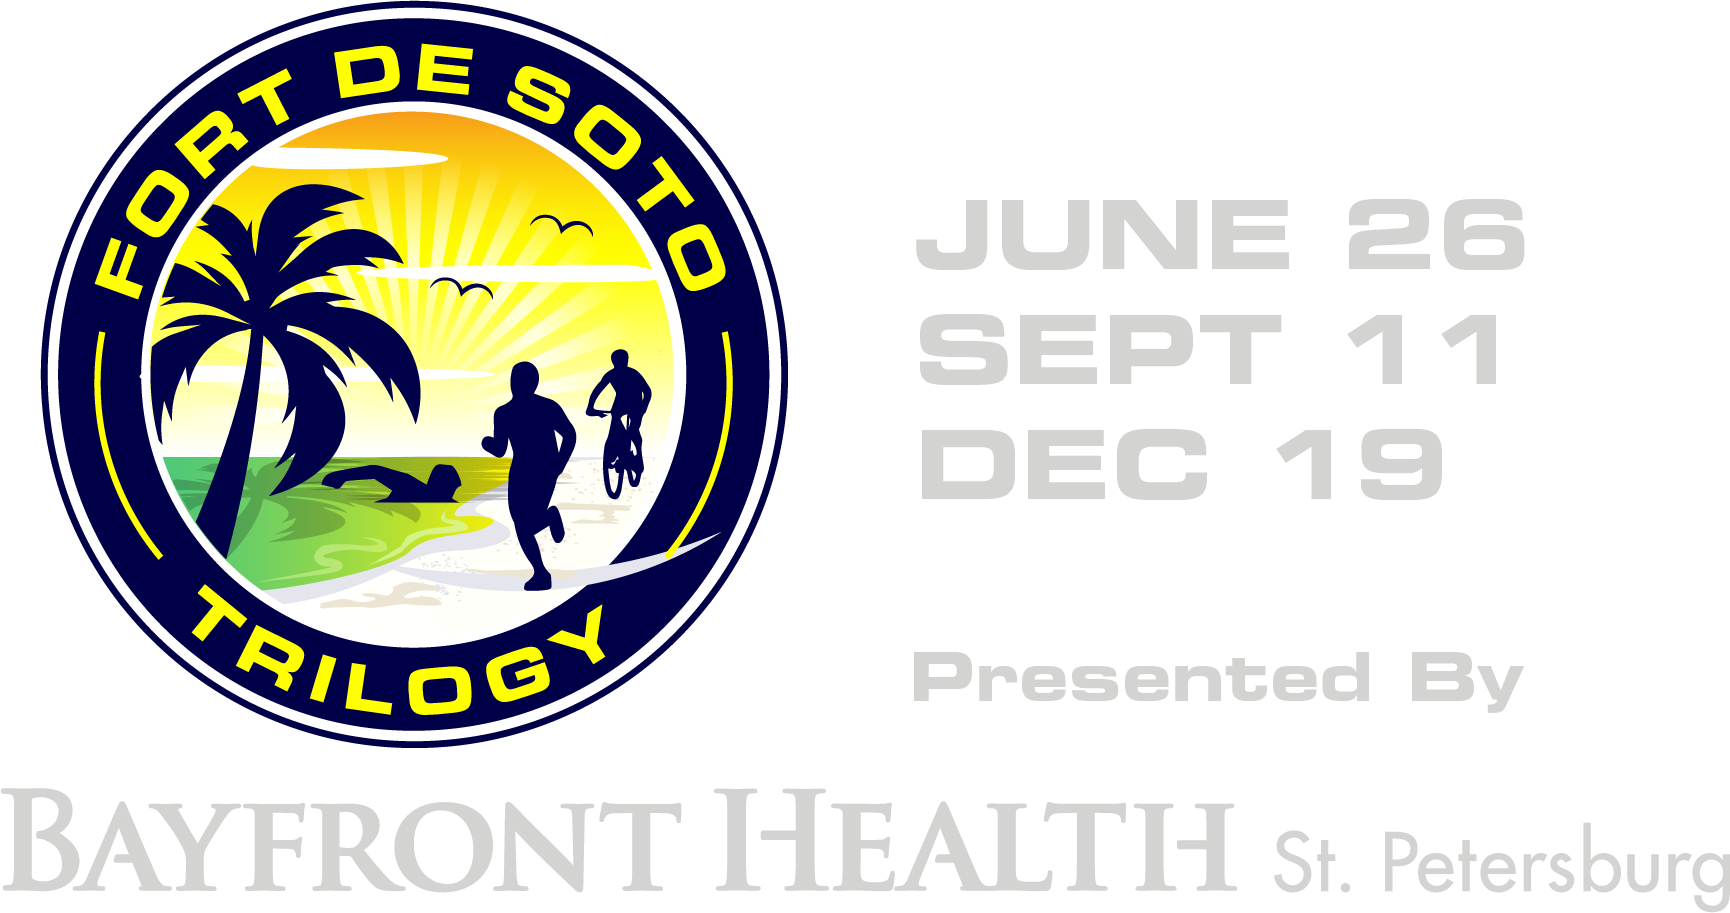 Fort DeSoto Triathlon Trilogy Brought to you by Integrity Multisport!